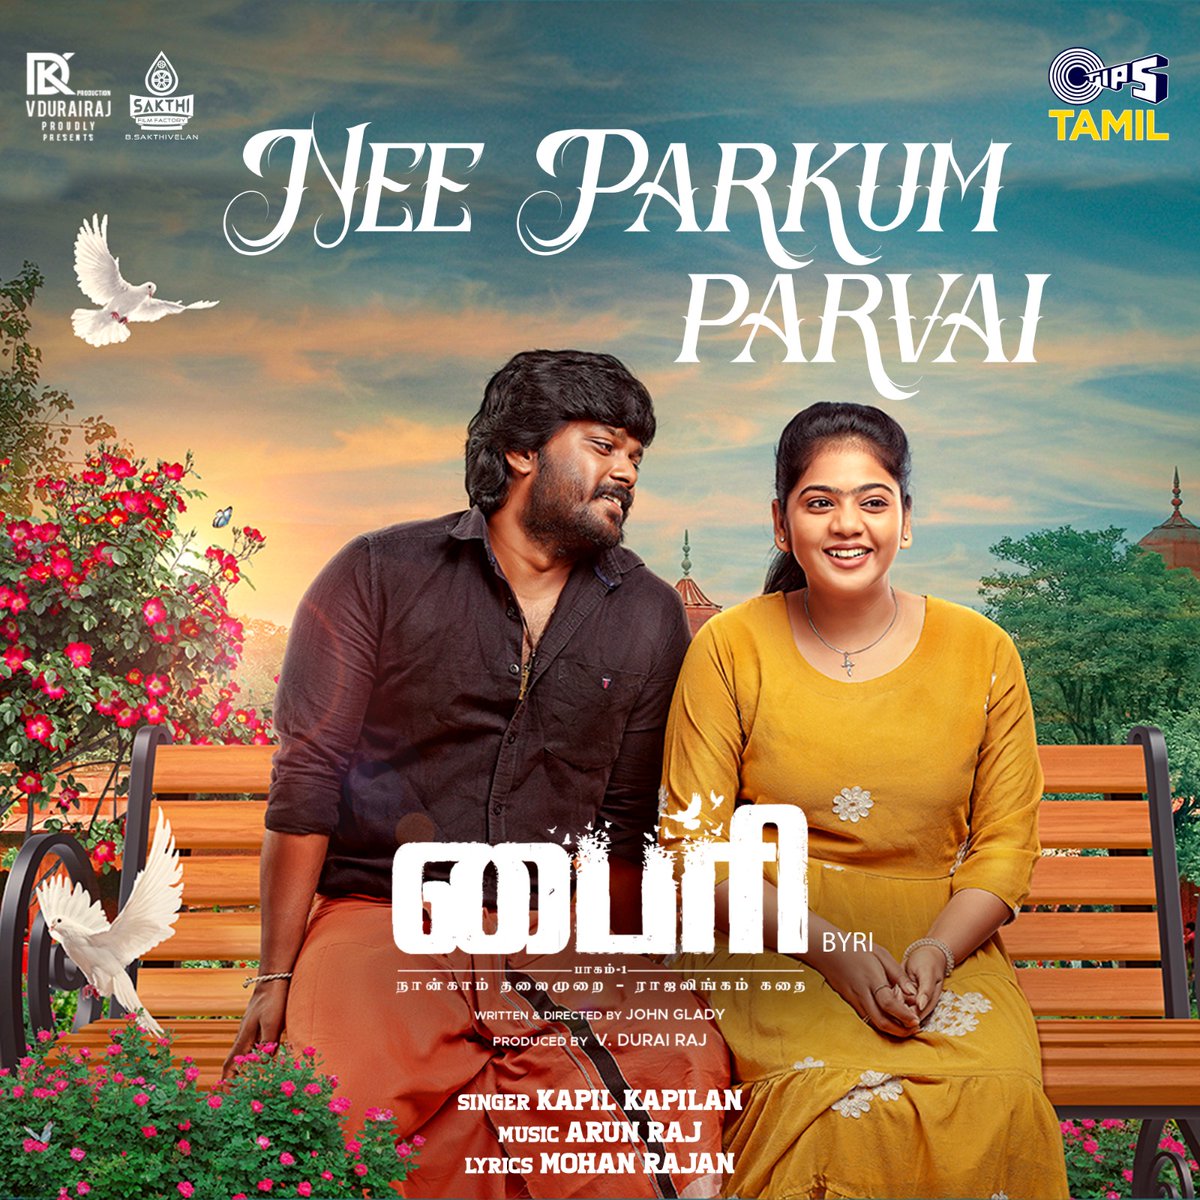 An enchanting First Single #NeeParkumParvai from #Byri is OUT NOW youtube.com/watch?v=i151Dw… feast your ears with this musical melody. An @arunrajmusic musical Lyrics by #MohanRaj Starring @actor_syeed Dir by @JohnGlady_dir Presented by @SakthiFilmFctry @sakthivelan_b…